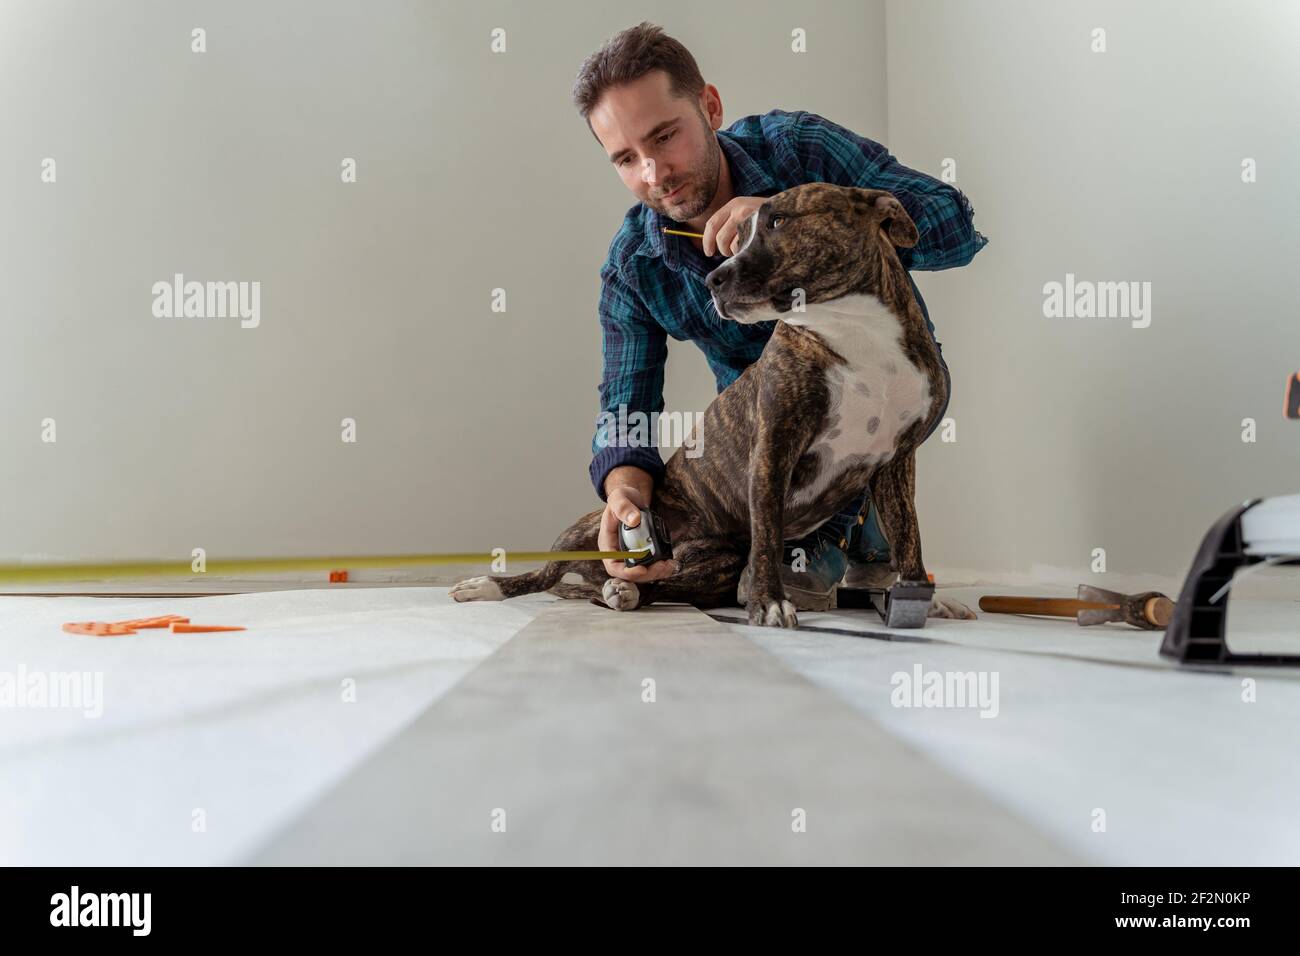 young man with his dog installing a wooden floor at home renovation Stock Photo